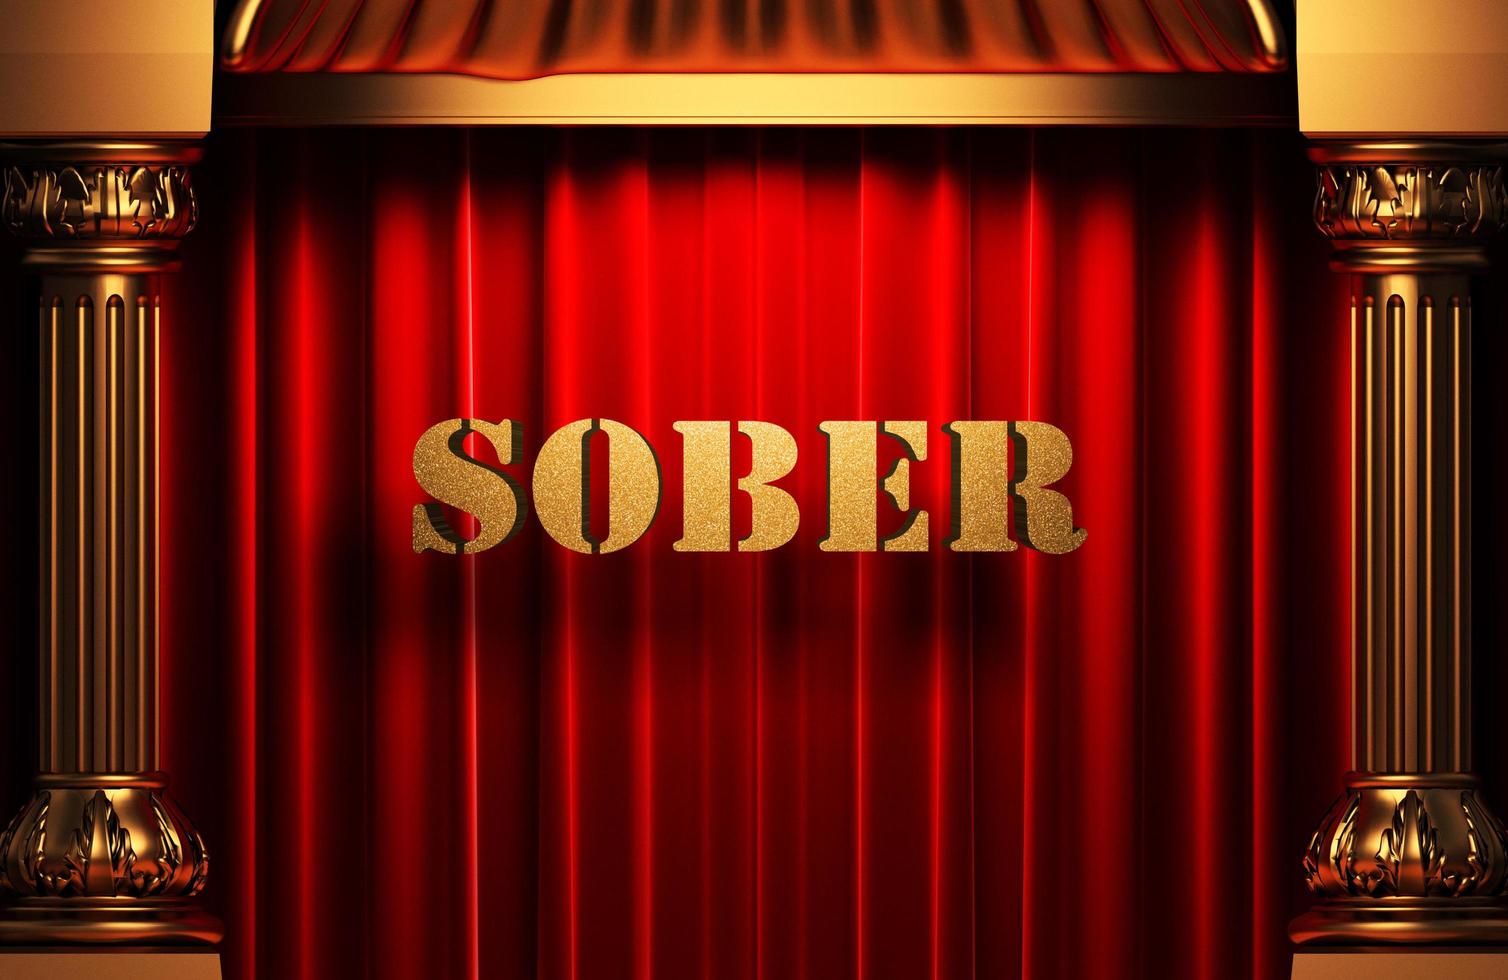 sober golden word on red curtain photo